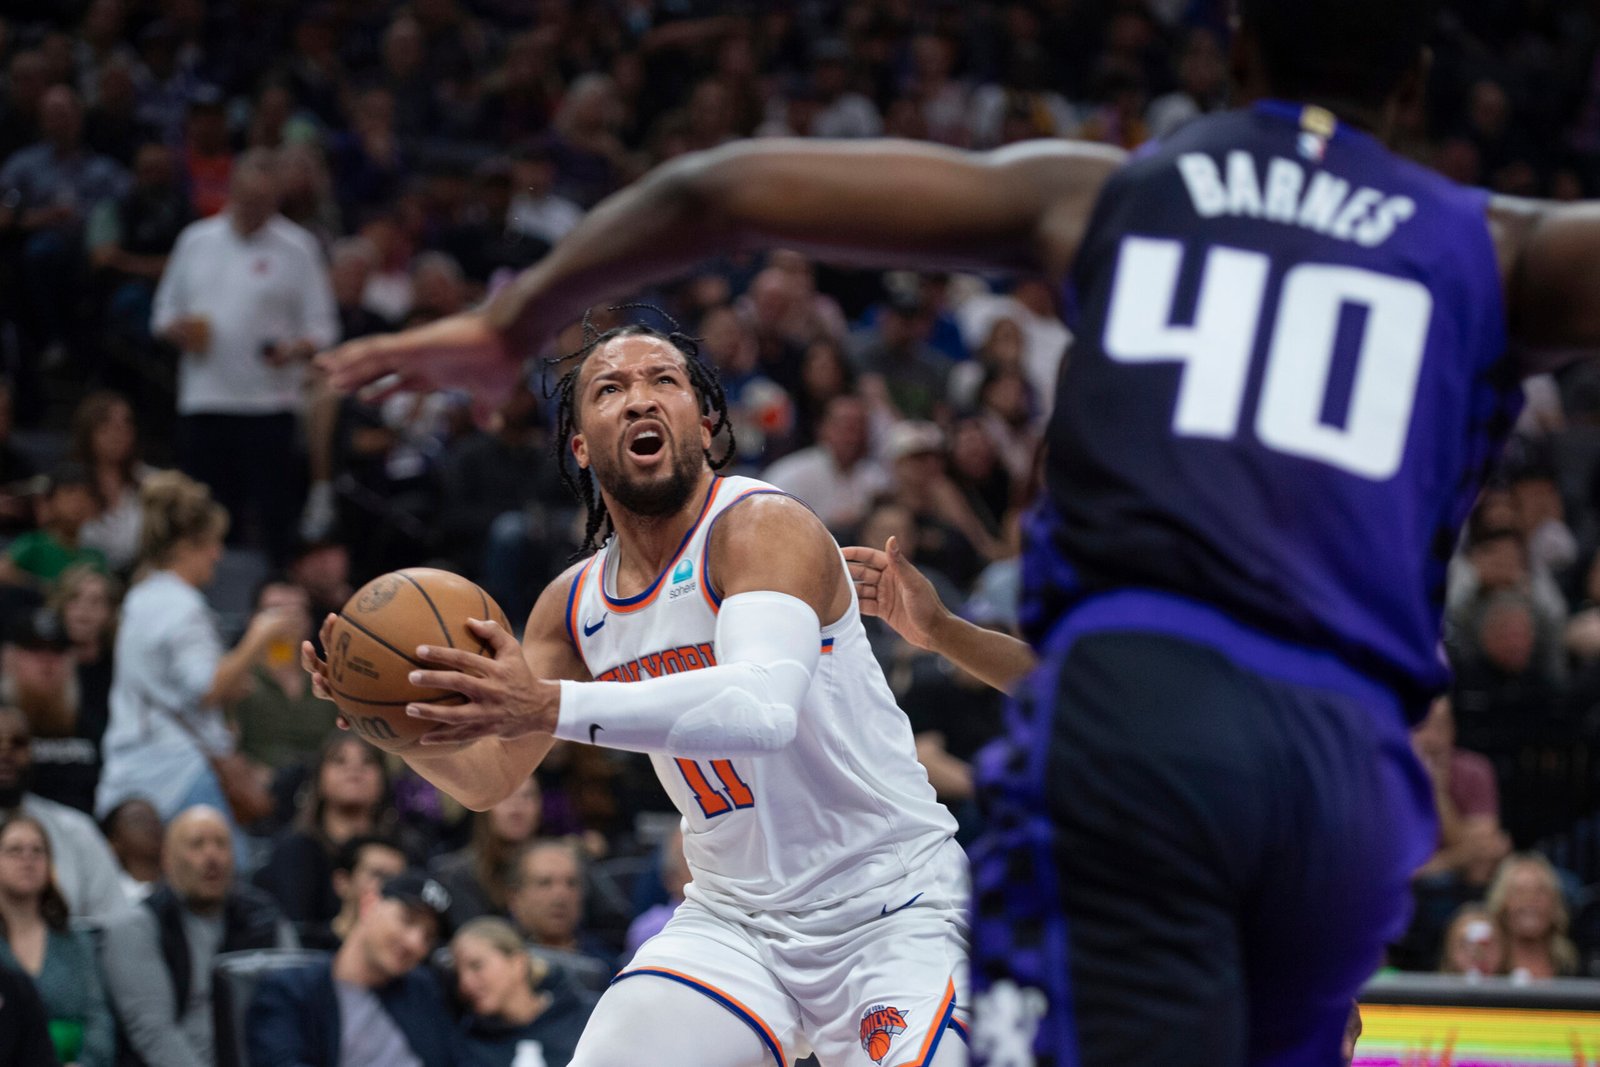 Brunson with another 40-point game, leads Knicks past Kings